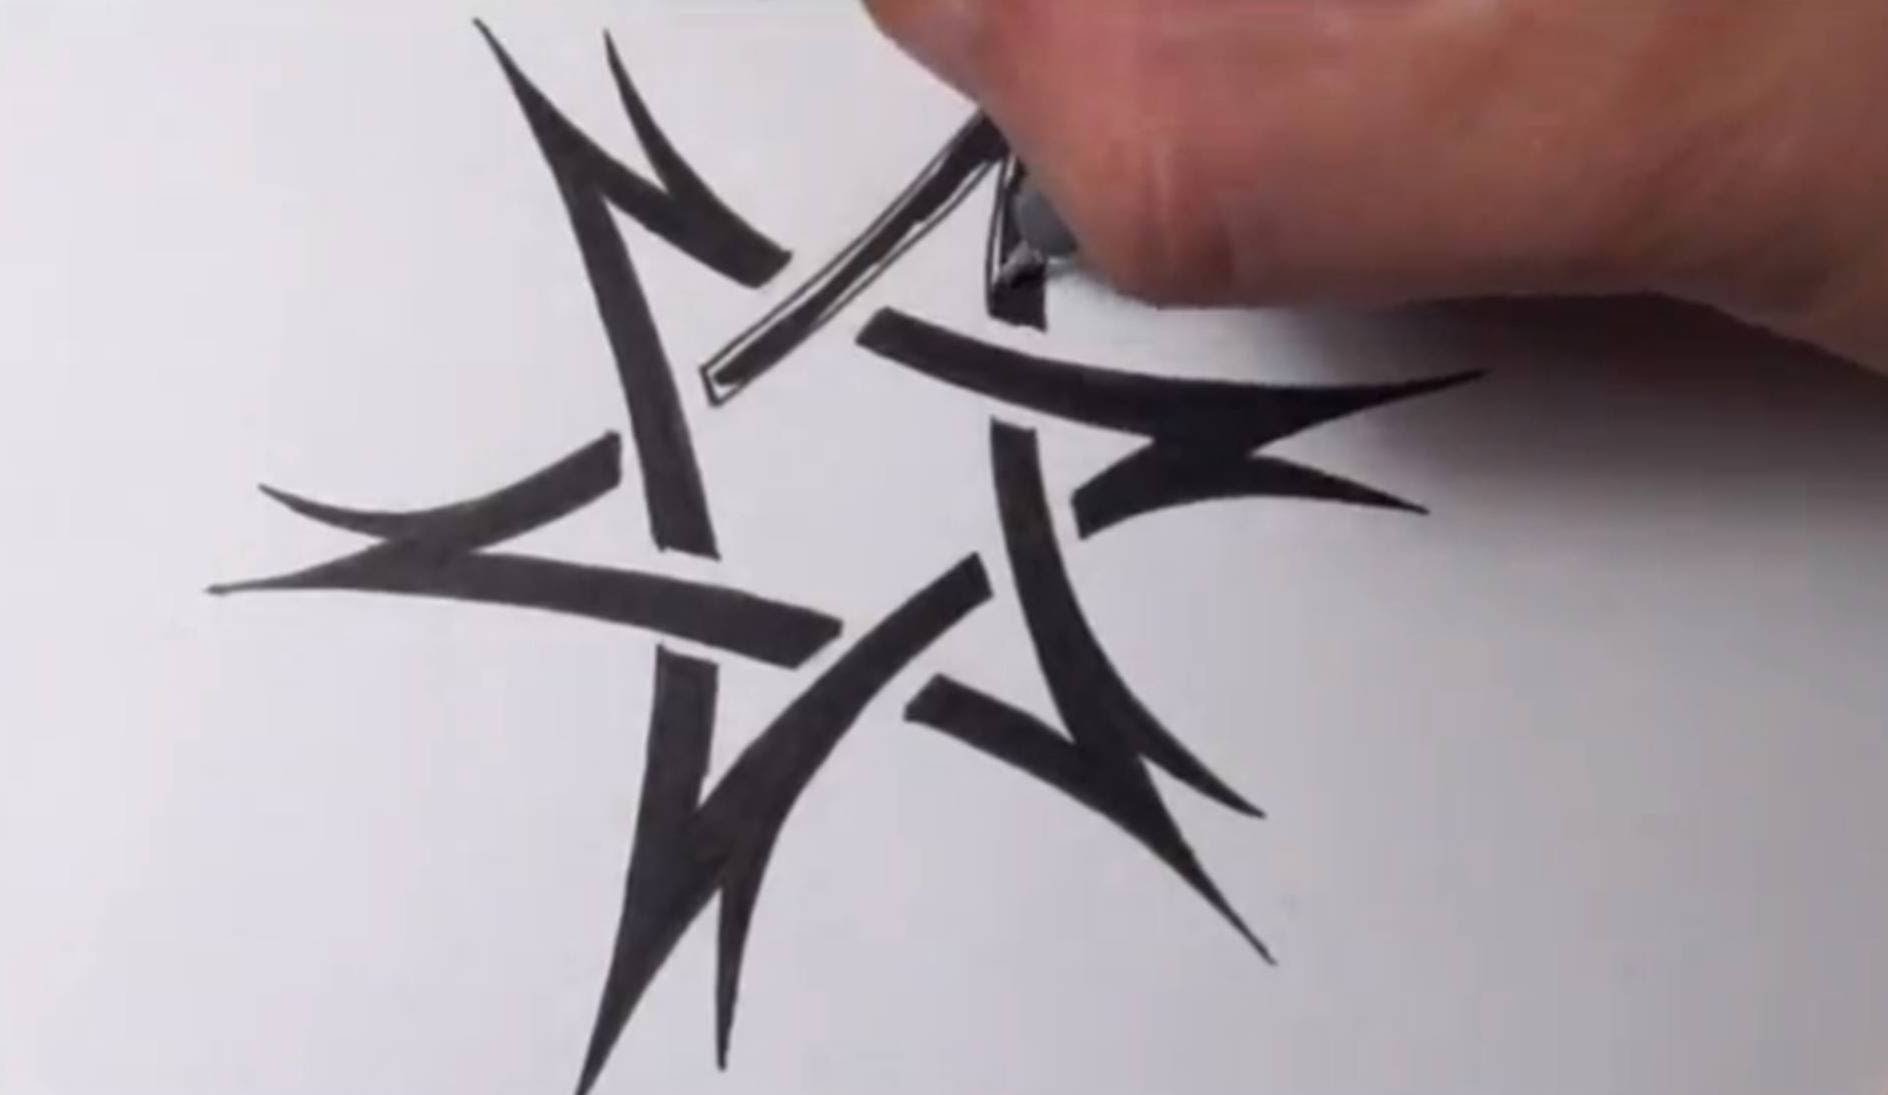 Drawing a Tribal Star of David Tattoo Design - Quick Sketch - YouTube